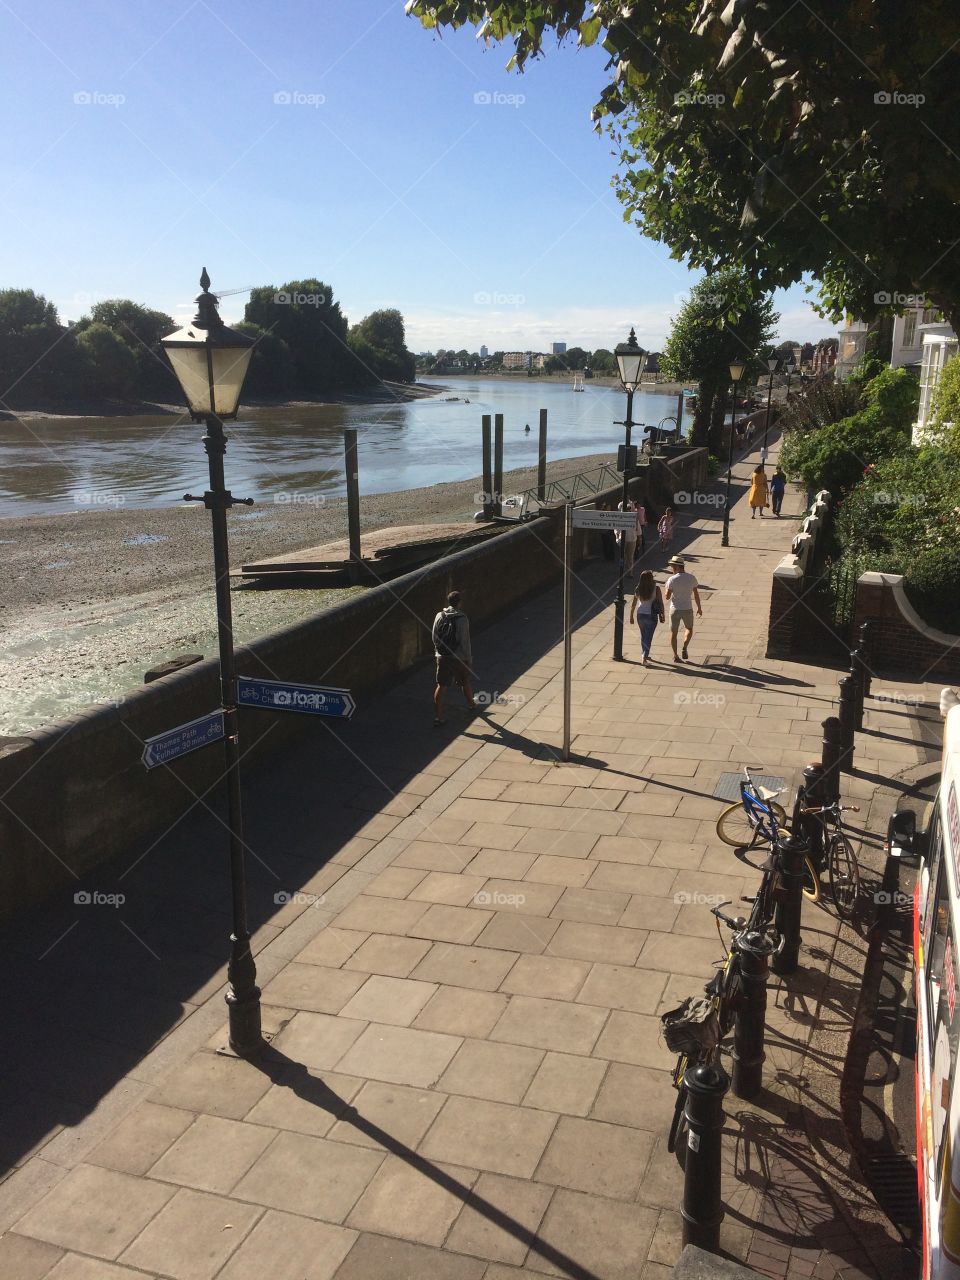 View of the Thames, from Hammersmith Bridge